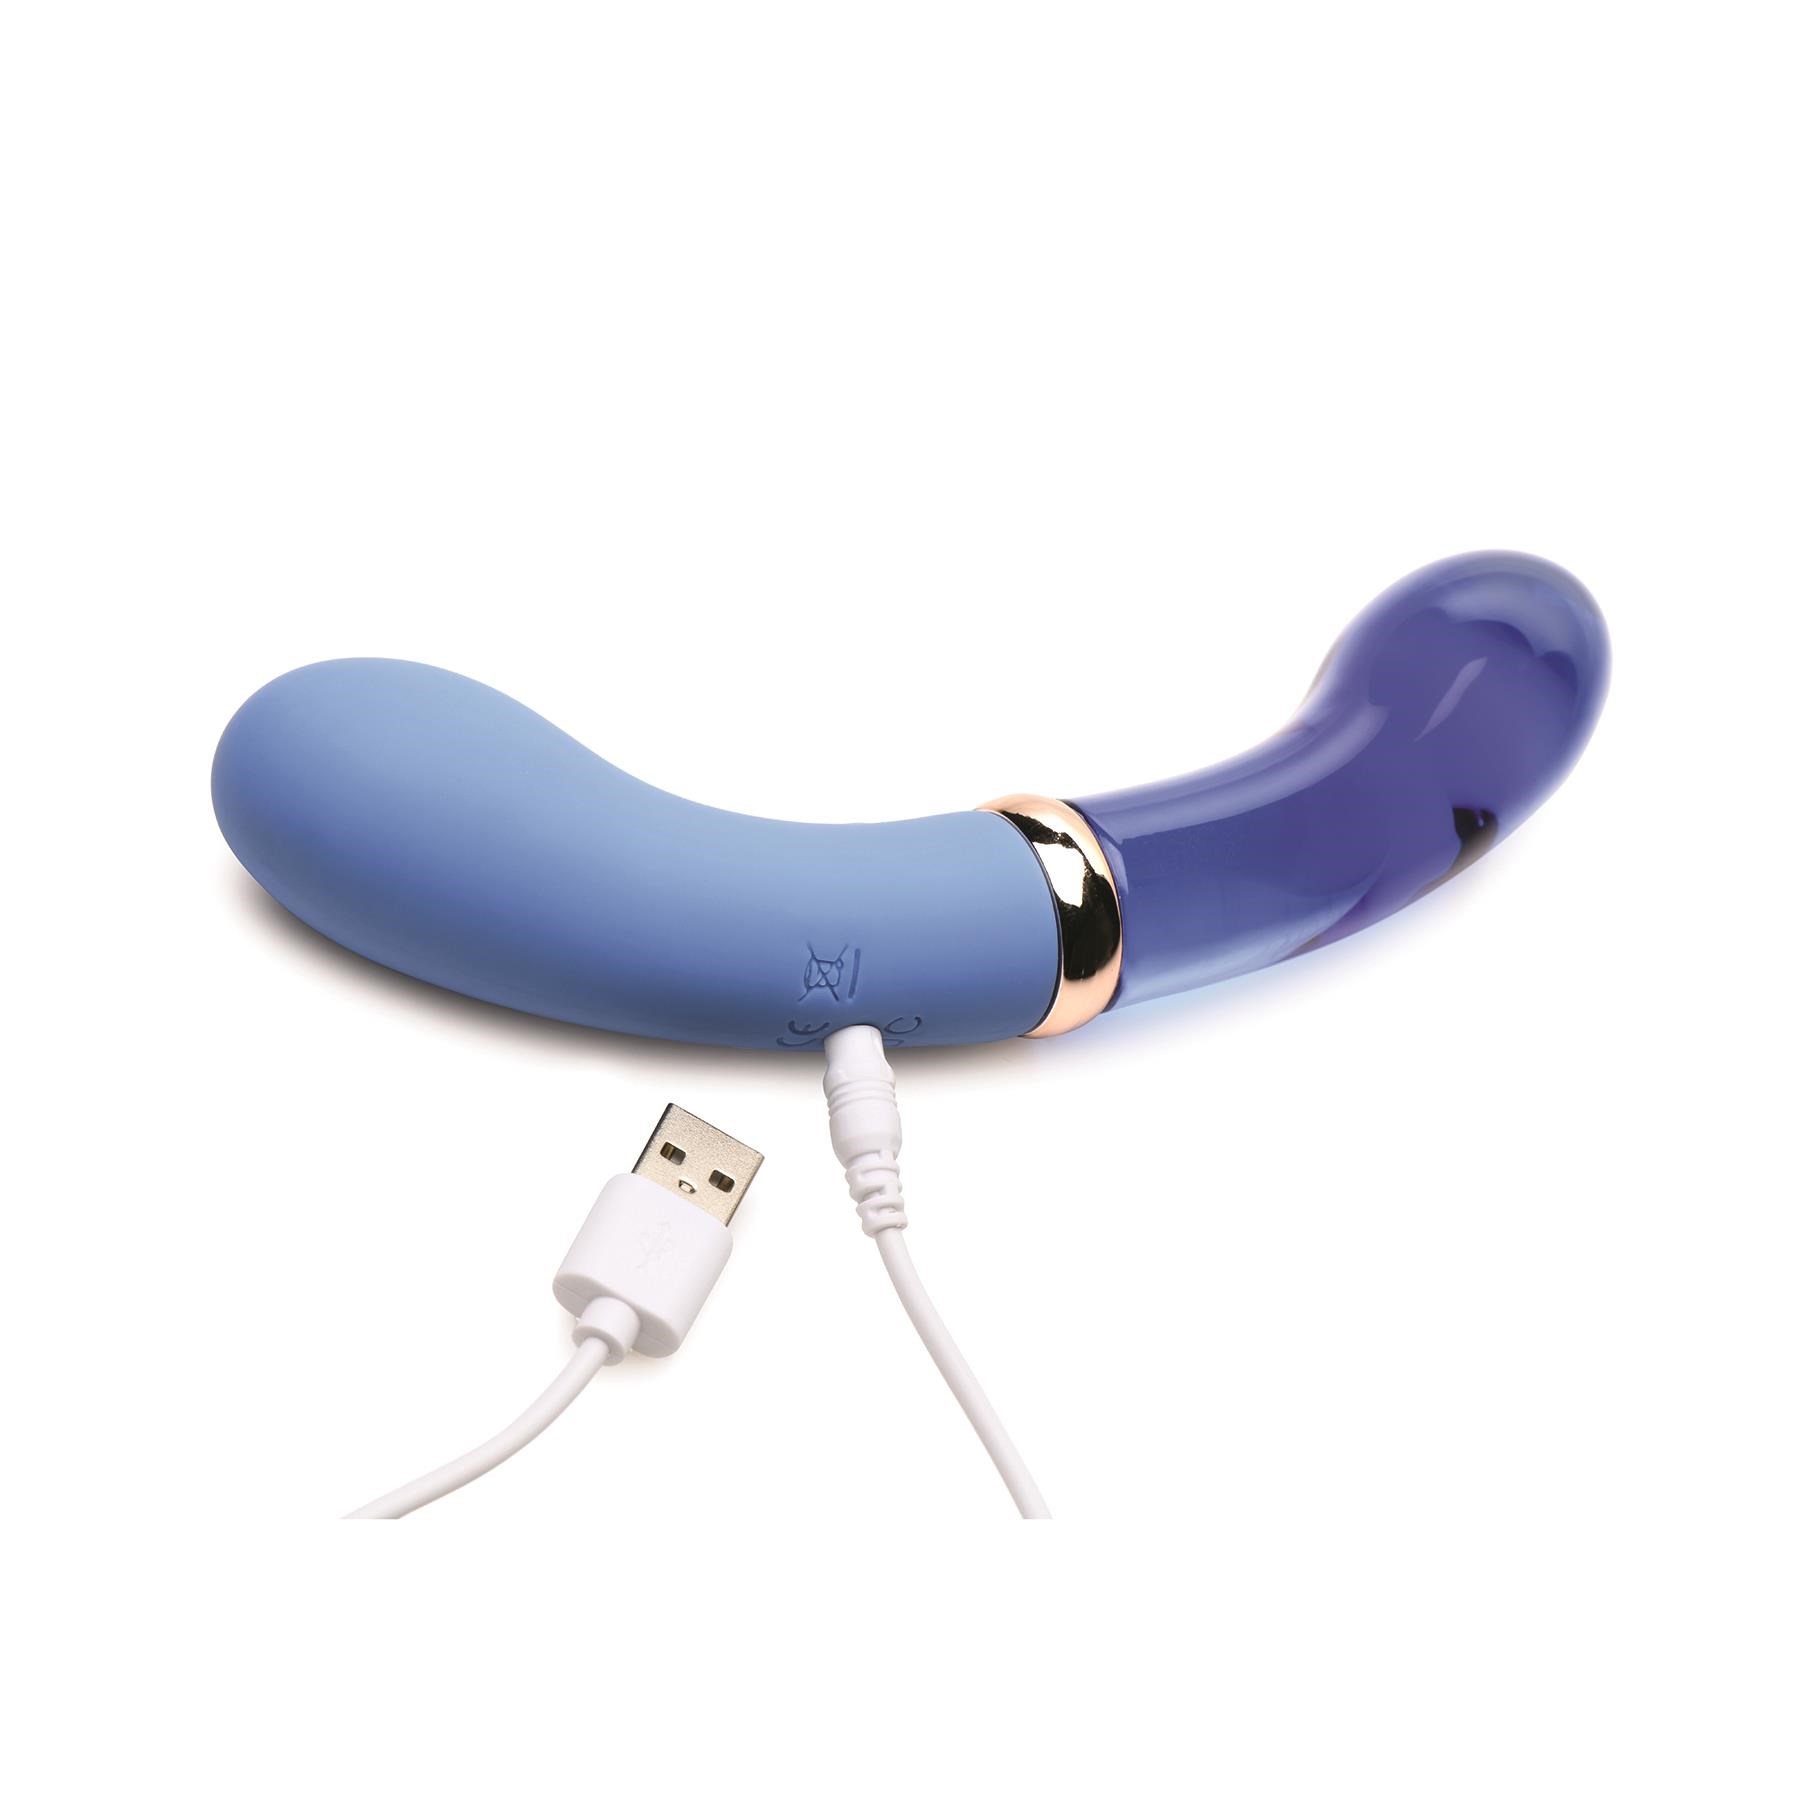 Prisms Vibra-Glass Bleu Dual Ended G-Spot Vibrator - Showing Where Charging Cable is Placed